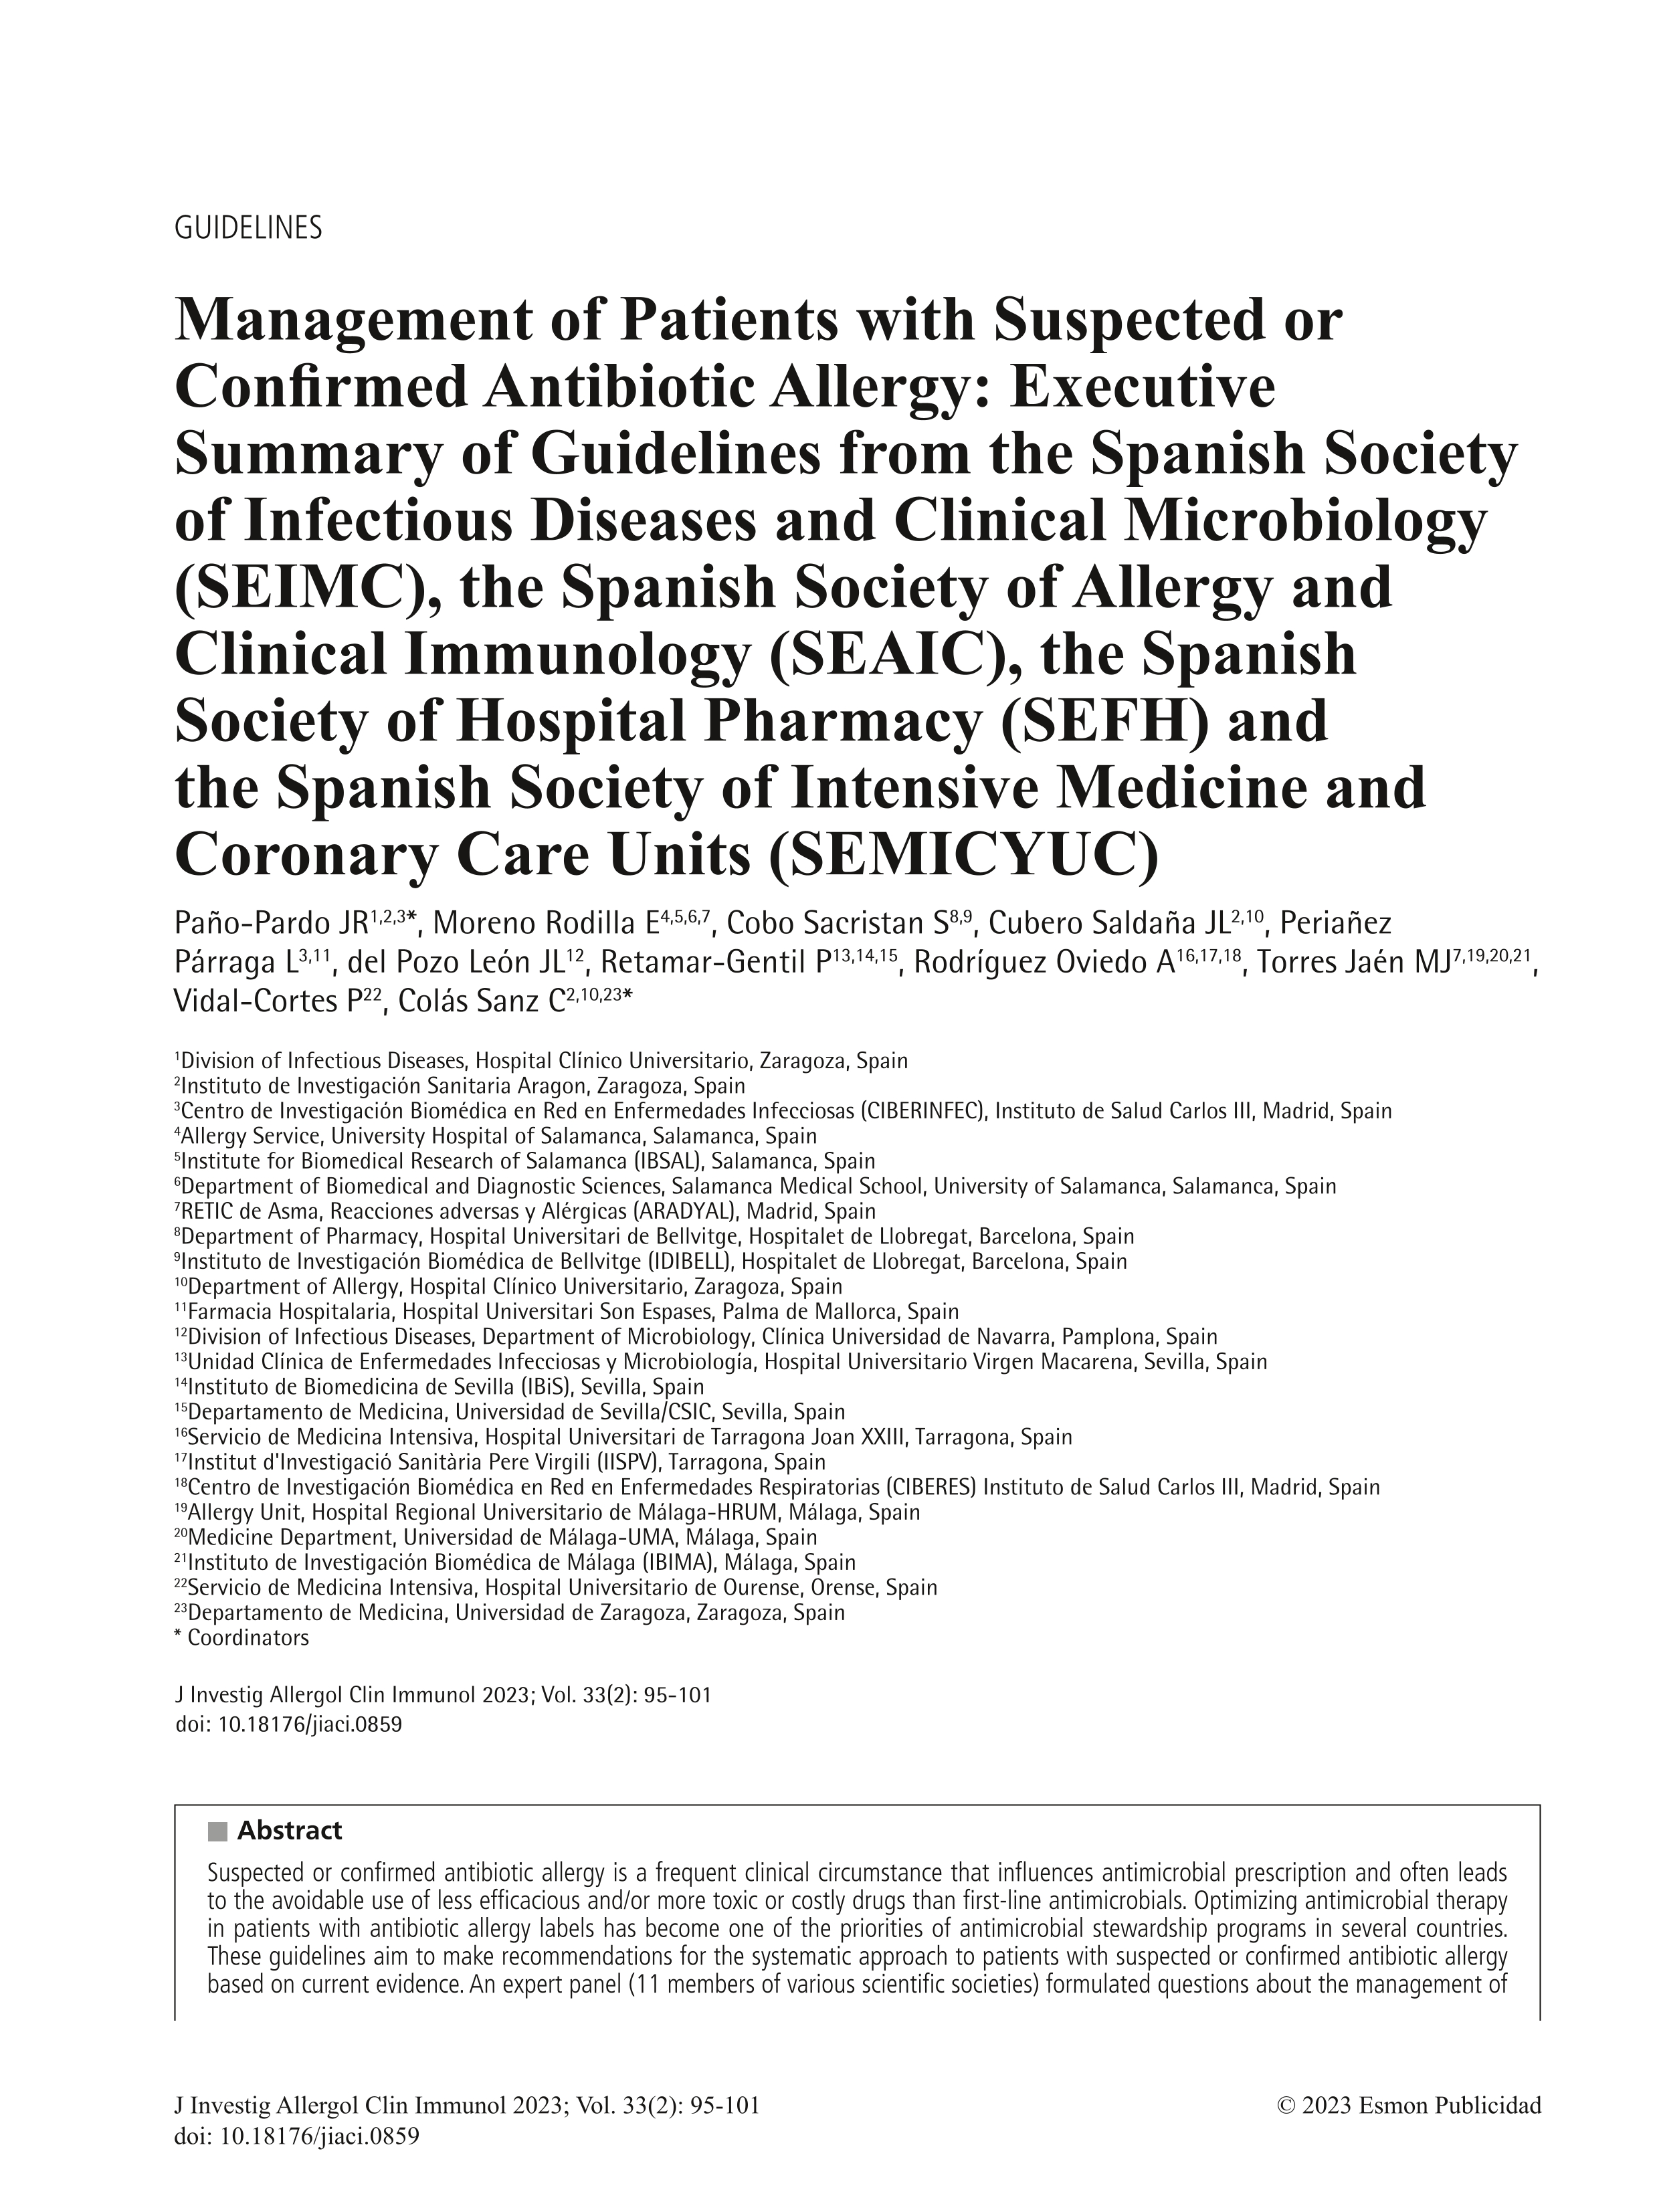 Management of patients with suspected or confirmed antibiotic allergy: executive summary of guidelines from the Spanish Society of Infectious Diseases and Clinical Microbiology (SEIMC), the Spanish Society of Allergy and Clinical Immunology (SEAIC), the Spanish Society of Hospital Pharmacy (SEFH)...